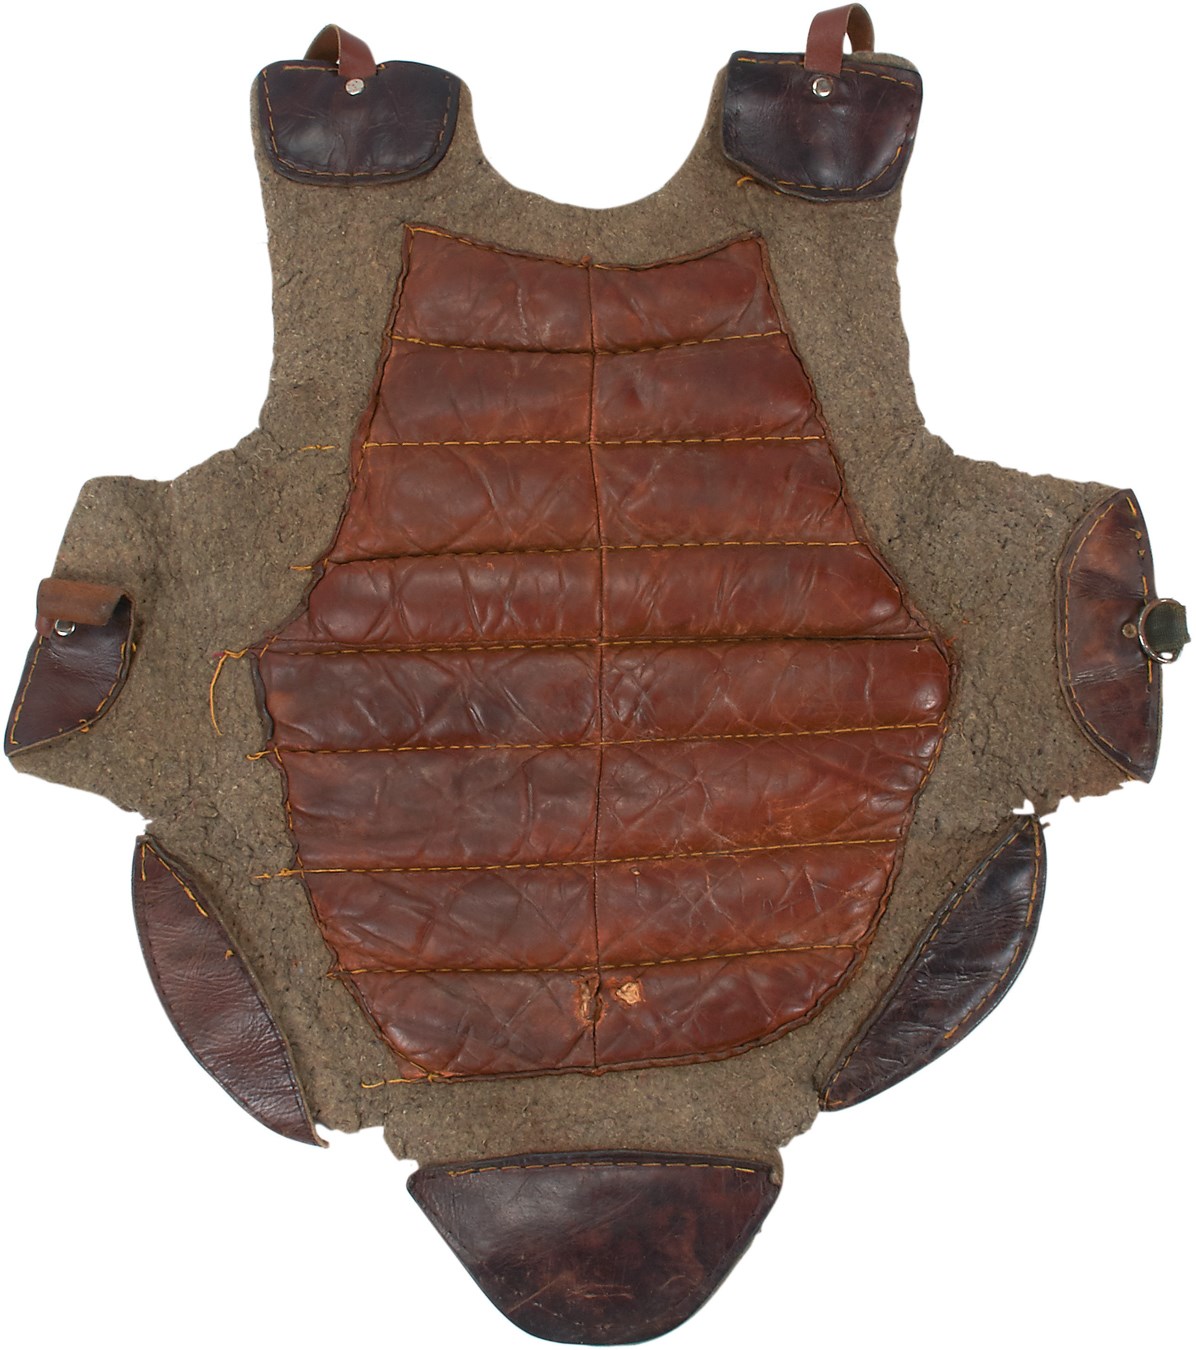 Rare Quilted Leather Catcher's Chest Protector